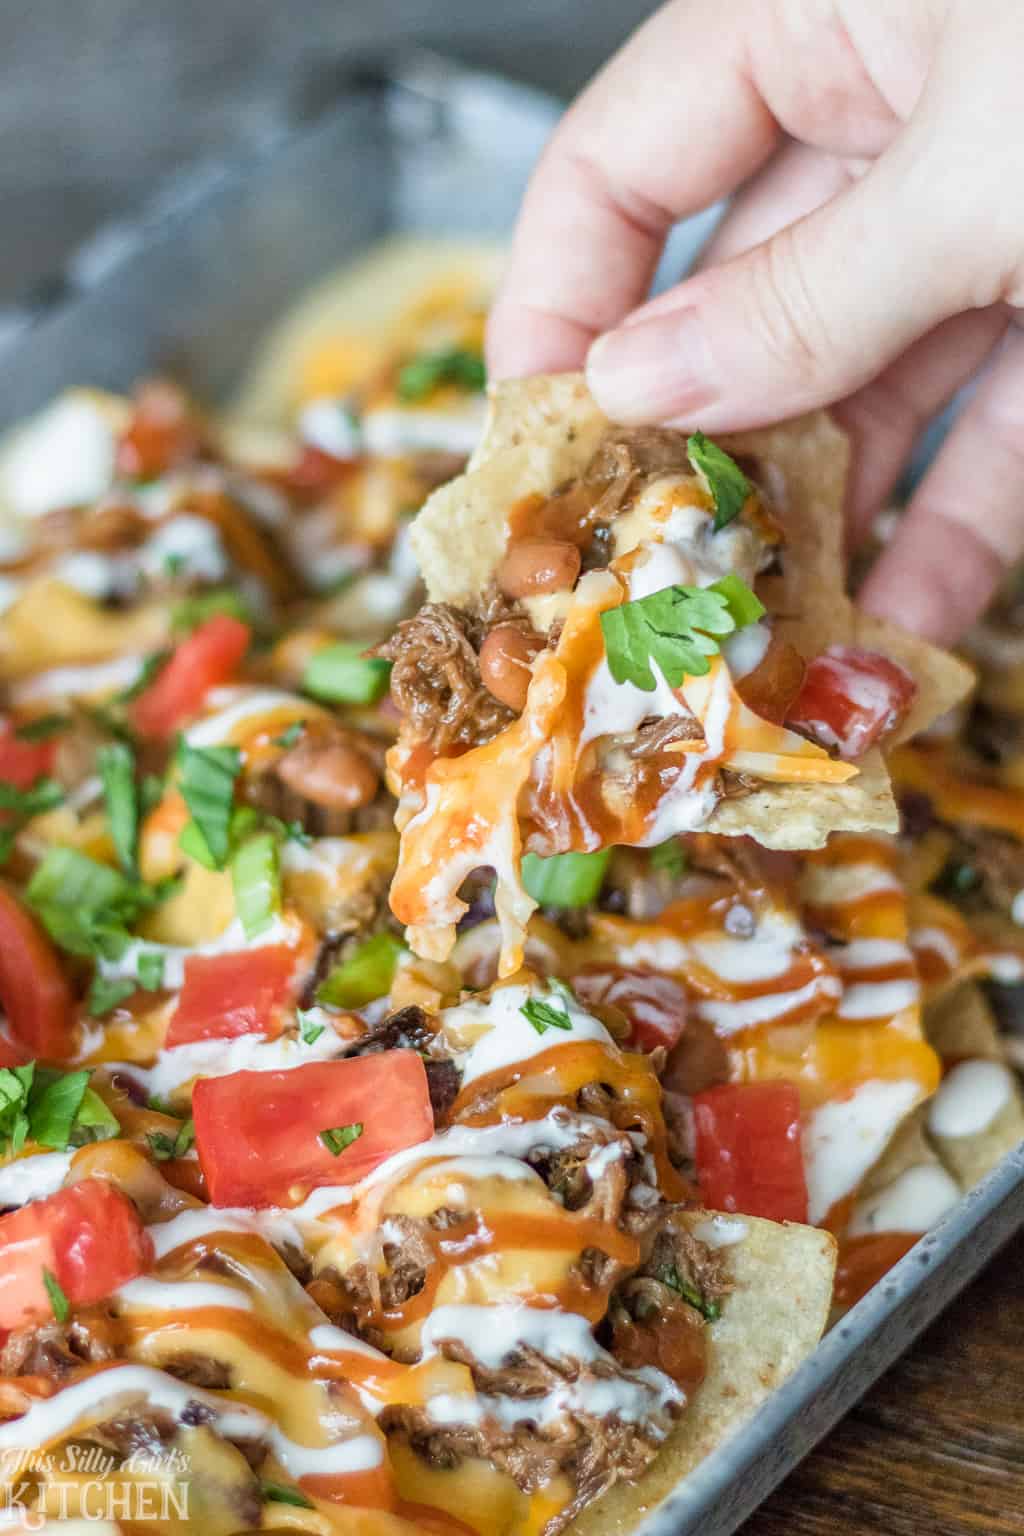 #BBQ Beef #Nachos, layered nachos piled high with tender beef, cheese sauce, and all the fixins! #Recipe from ThisSillyGirlsKitchen.com #bbqbeef #appetizer